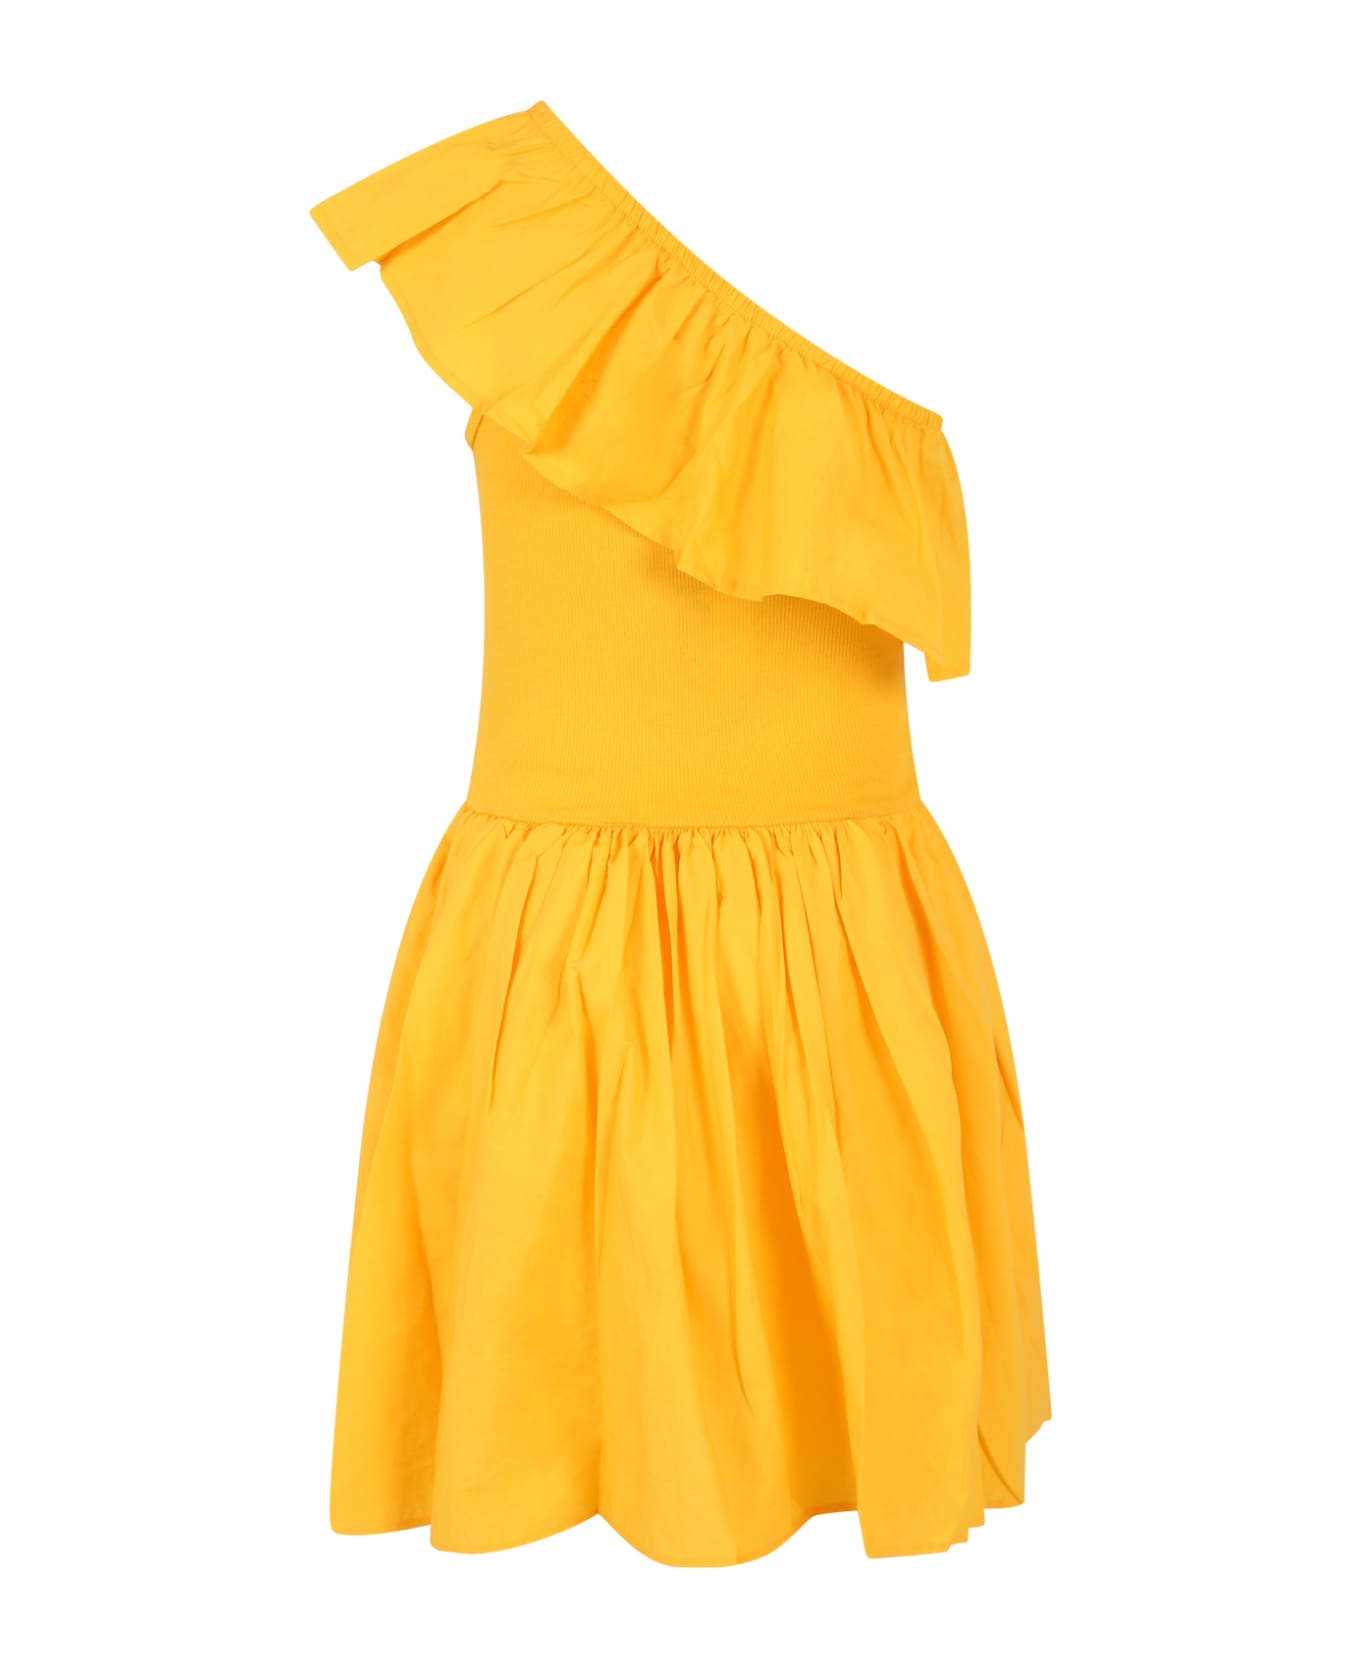 Molo Yellow Dress For Girl With Ruffles - Yellow